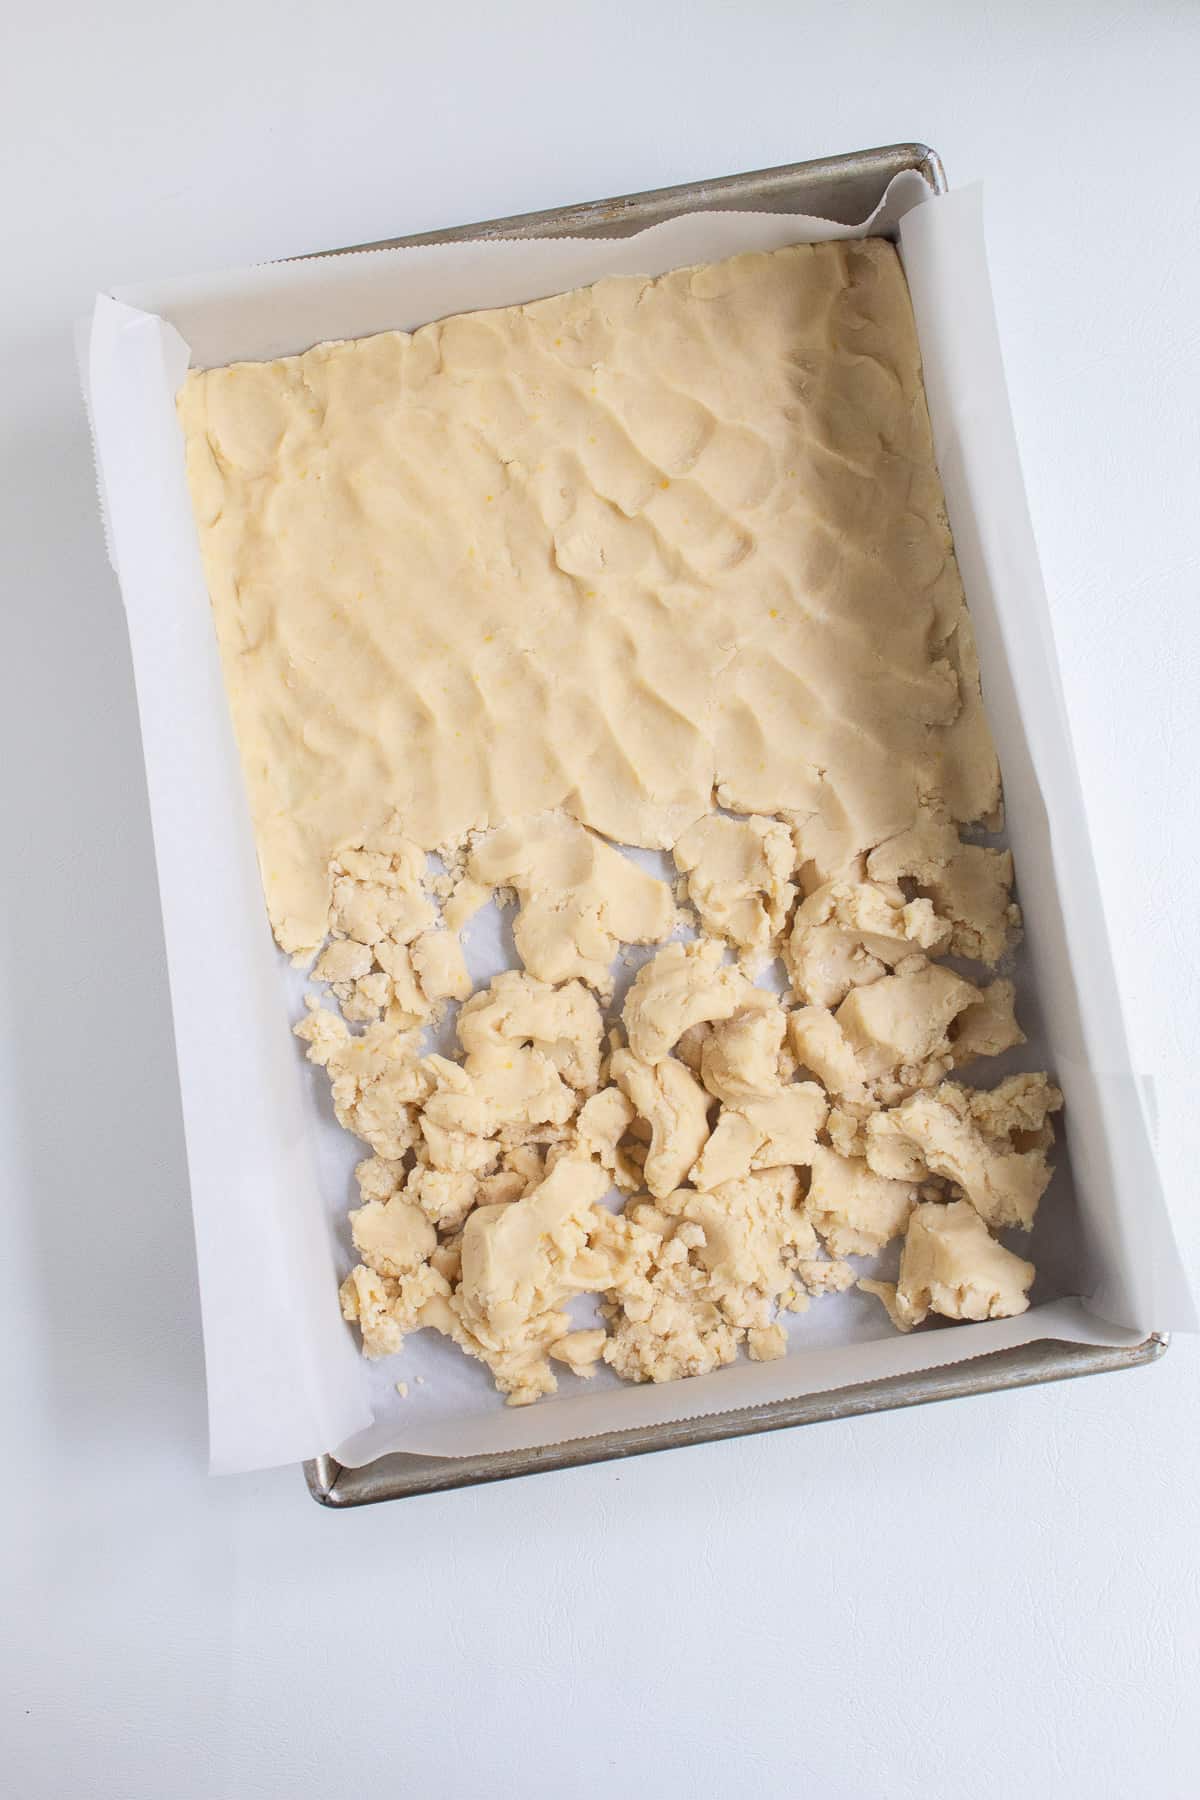 The shortbread mixture pressed into a parchment-lined baking pan.